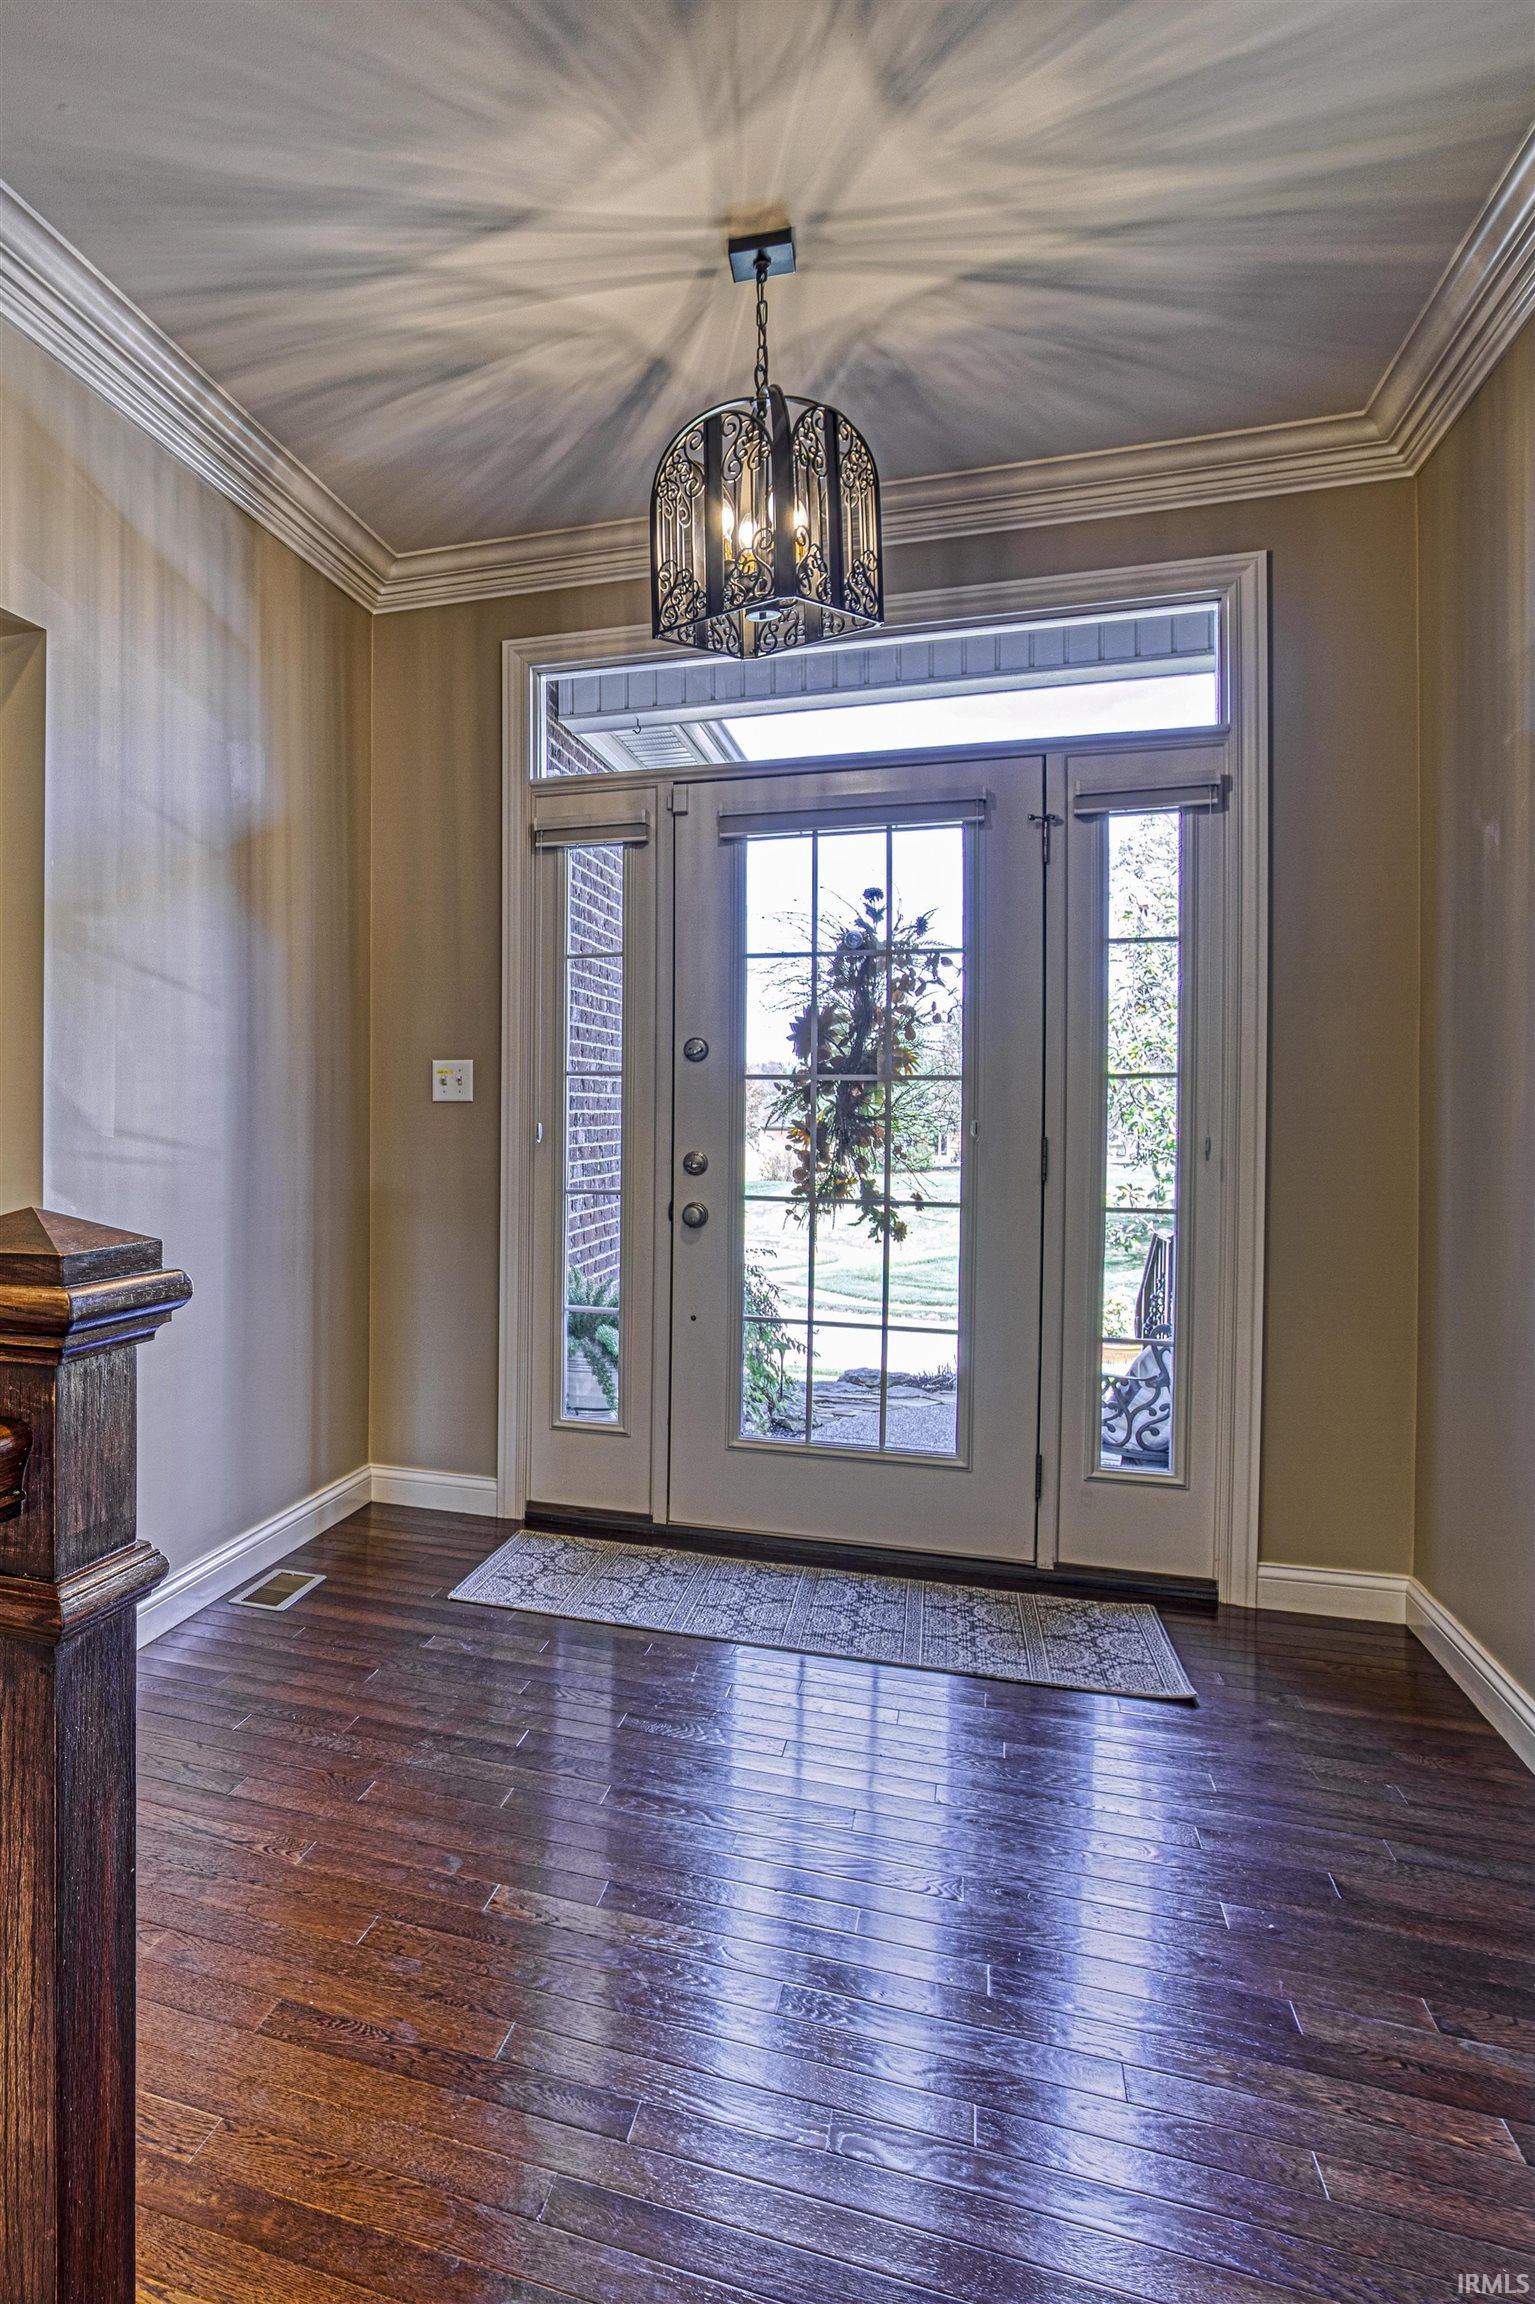 The foyer with gorgeous hardwood flooring and crown molding